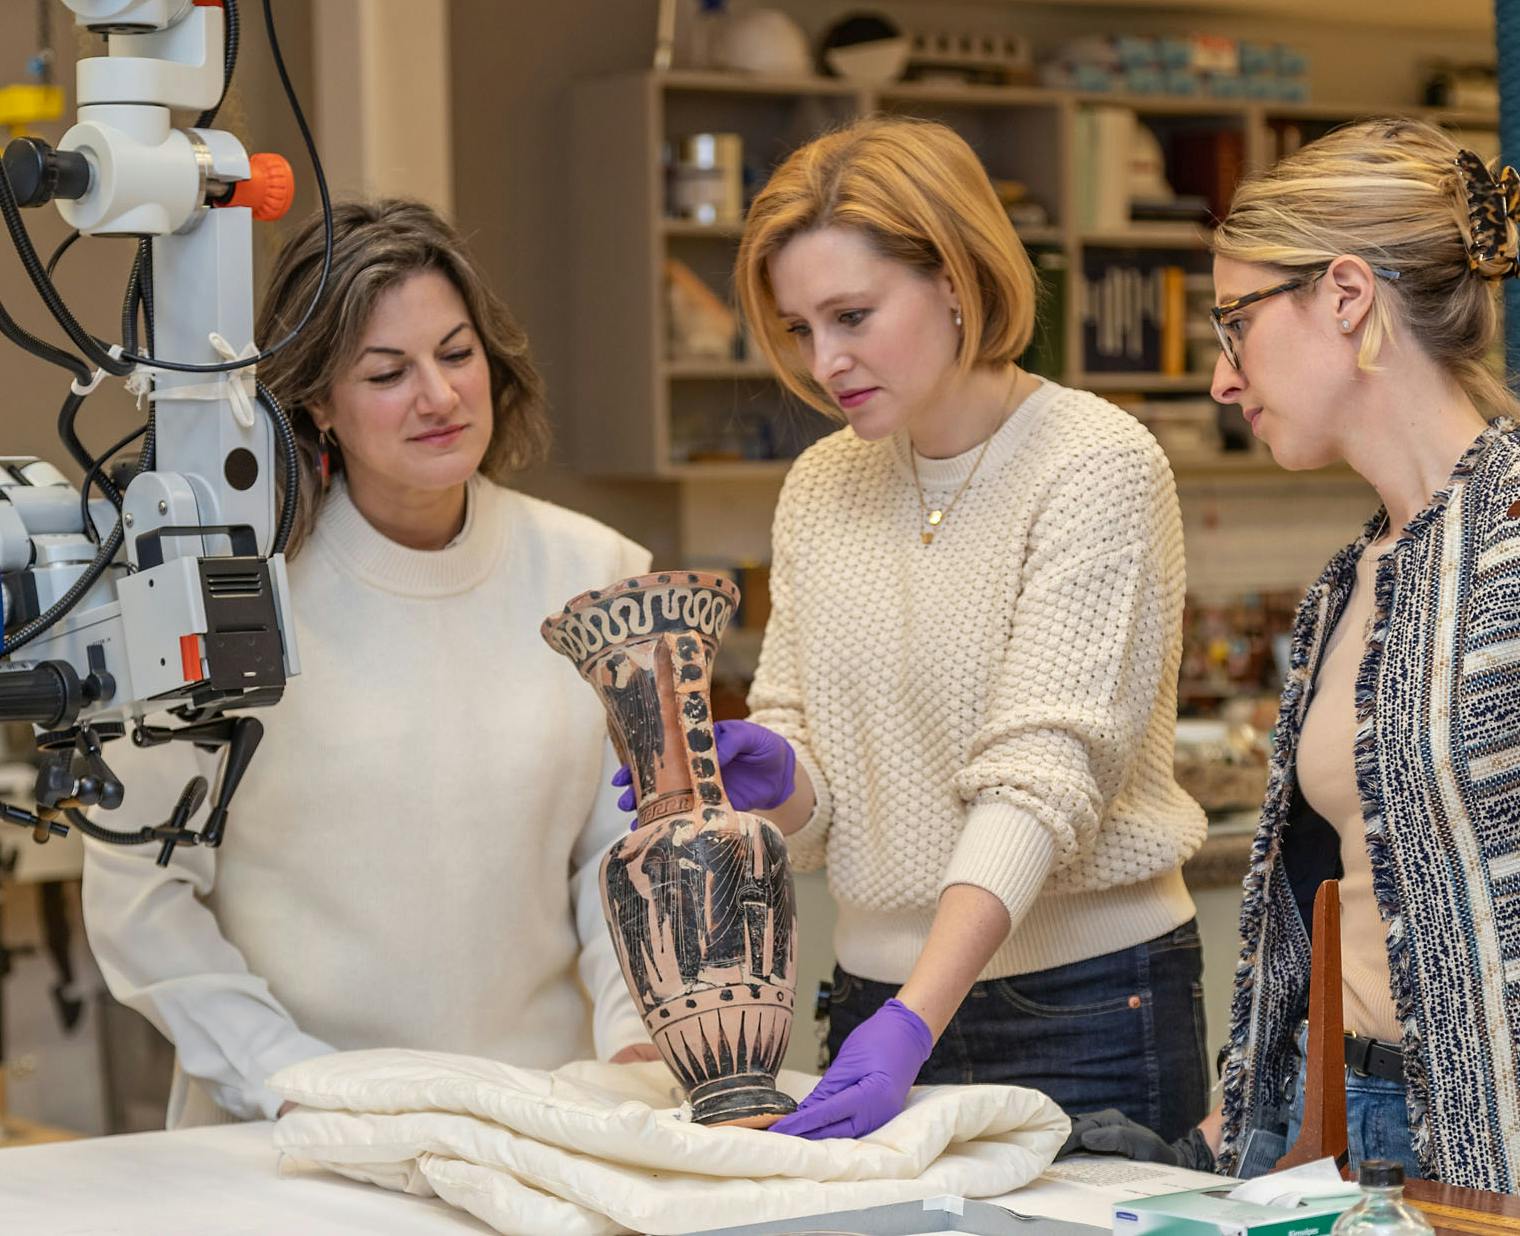 Preventive and objects conservators examining a Greek vase in the objects conservation lab